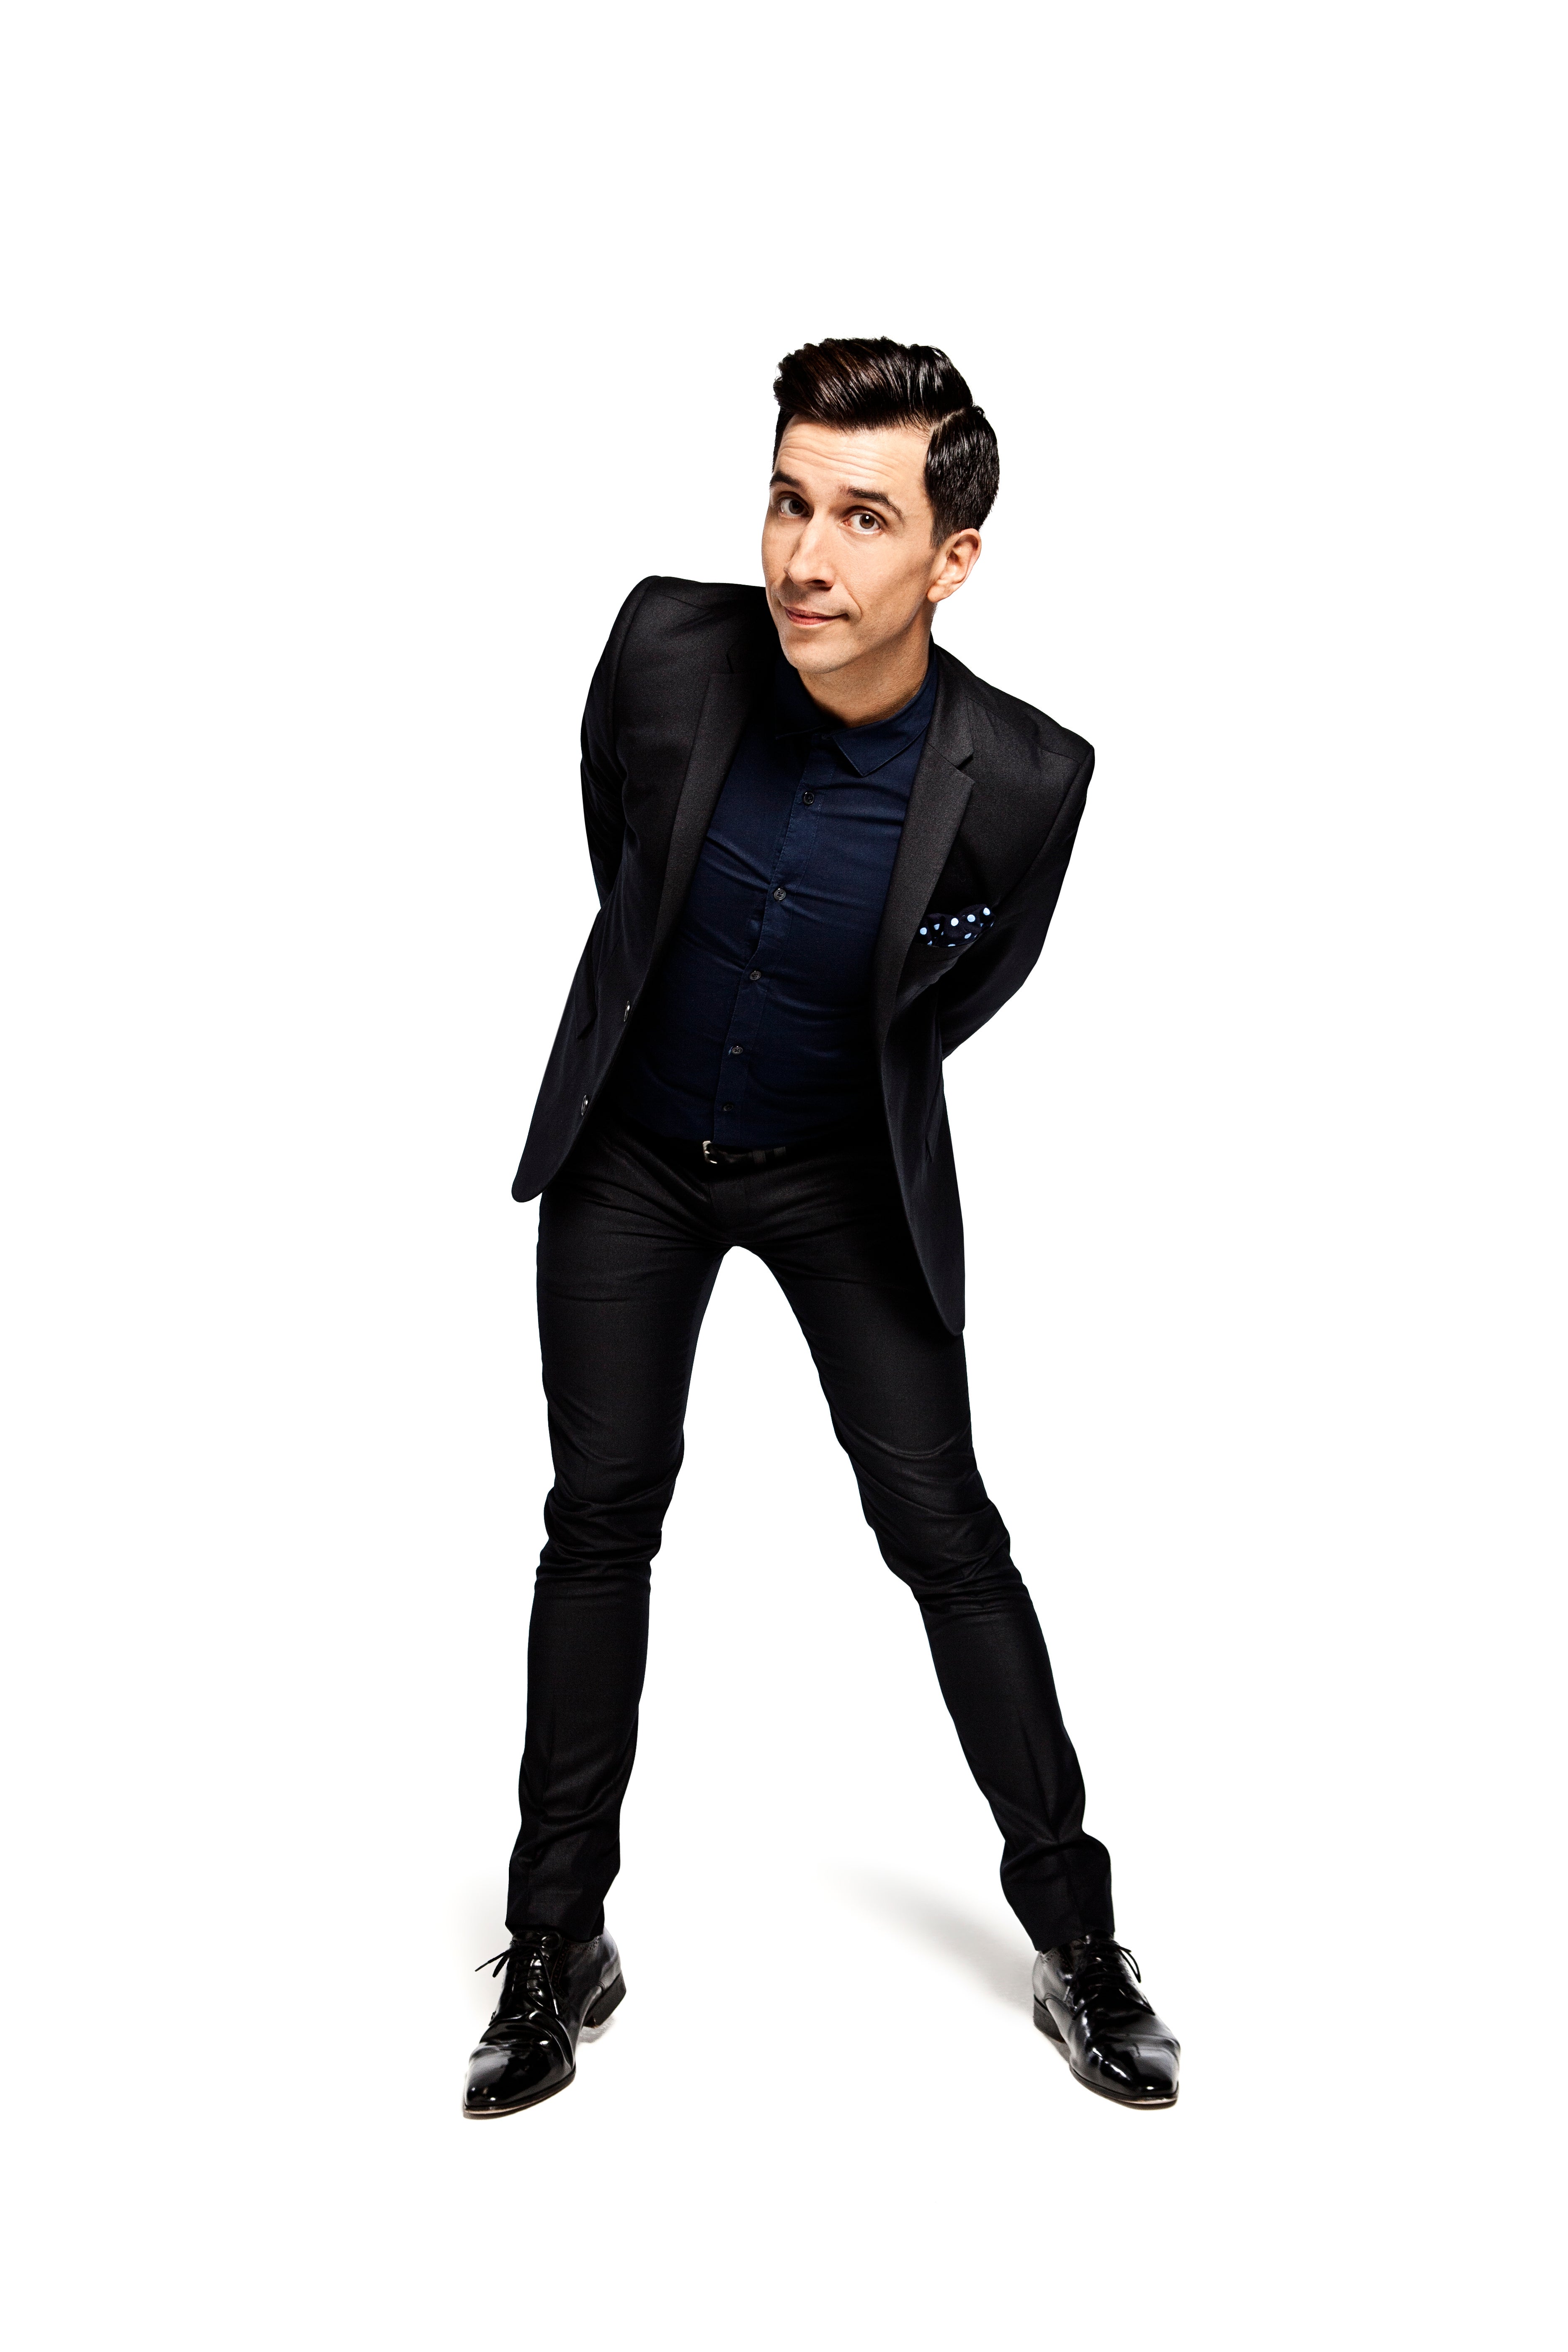 Russell Kane: Hyperactive presale code for genuine tickets in Salford Quays